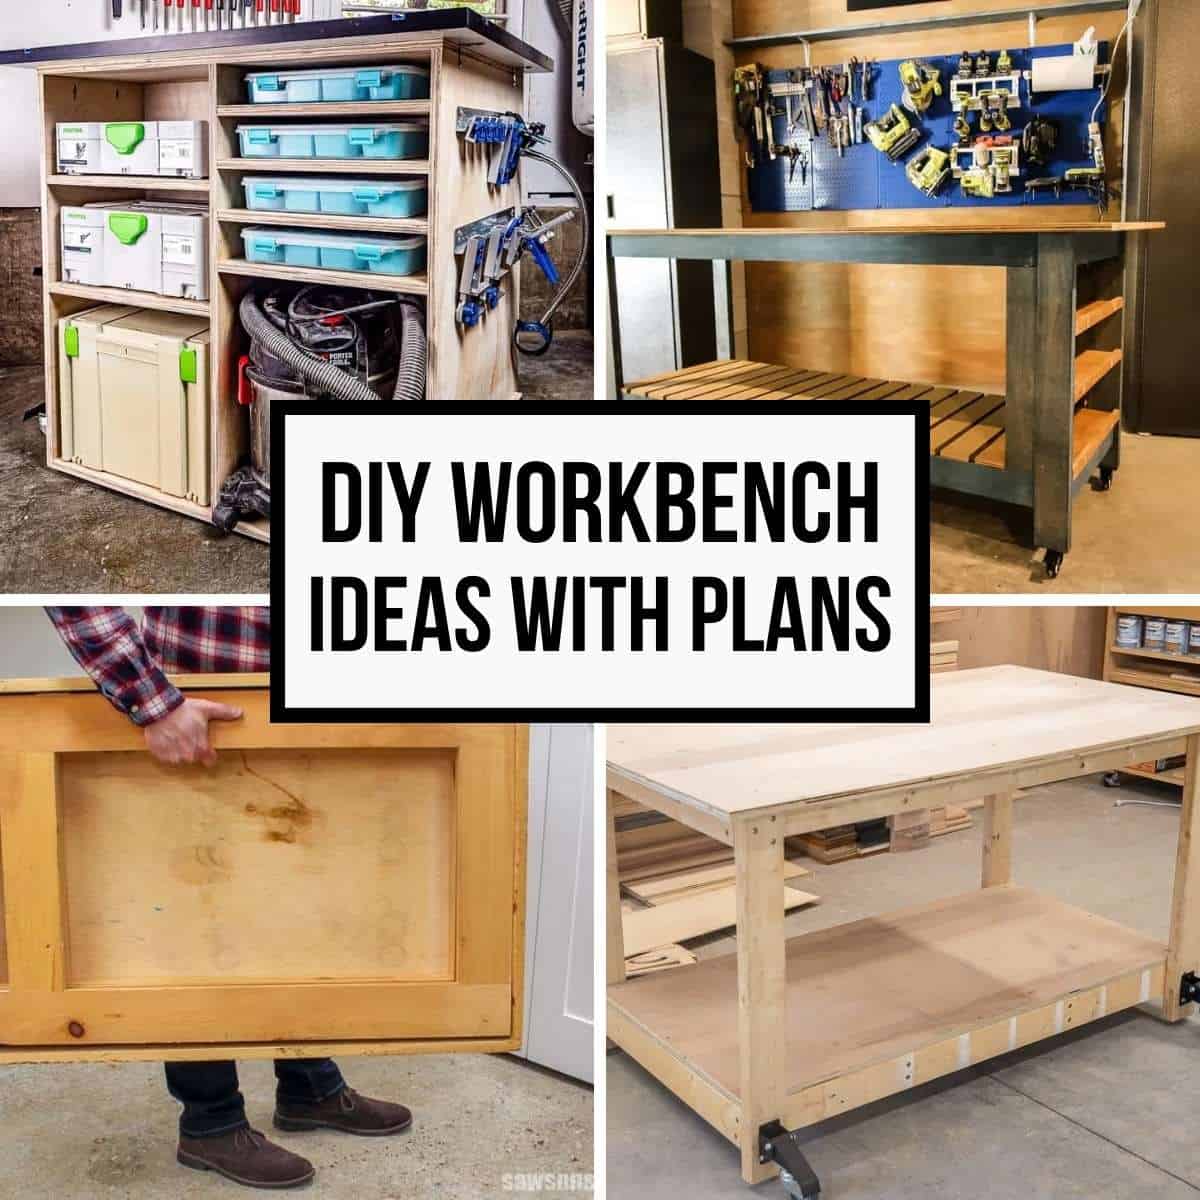 DIY Kreg Clamp Rack for your Workshop  Clamp storage, Wood projects that  sell, Garage organization diy